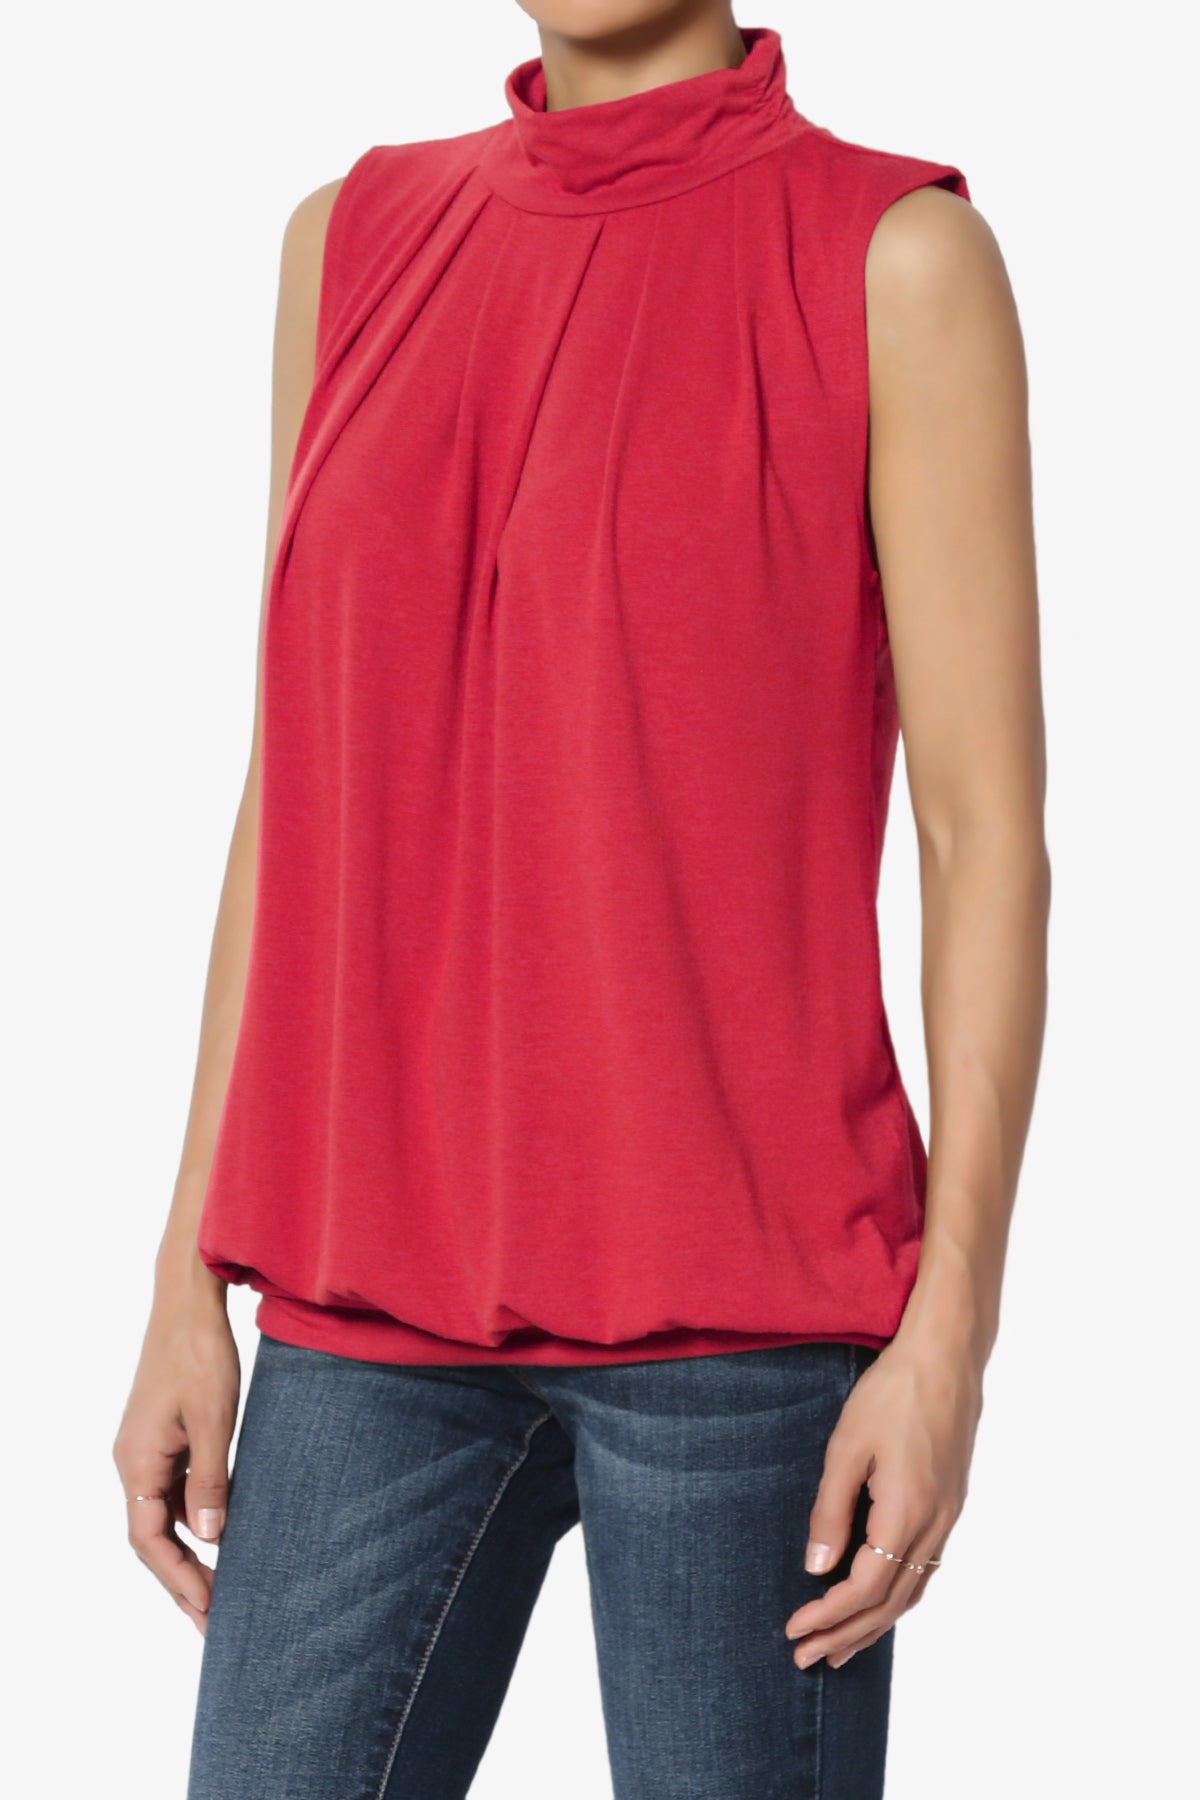 Load image into Gallery viewer, Jibbitz Sleeveless Mock Neck Pleated Top RED_3
